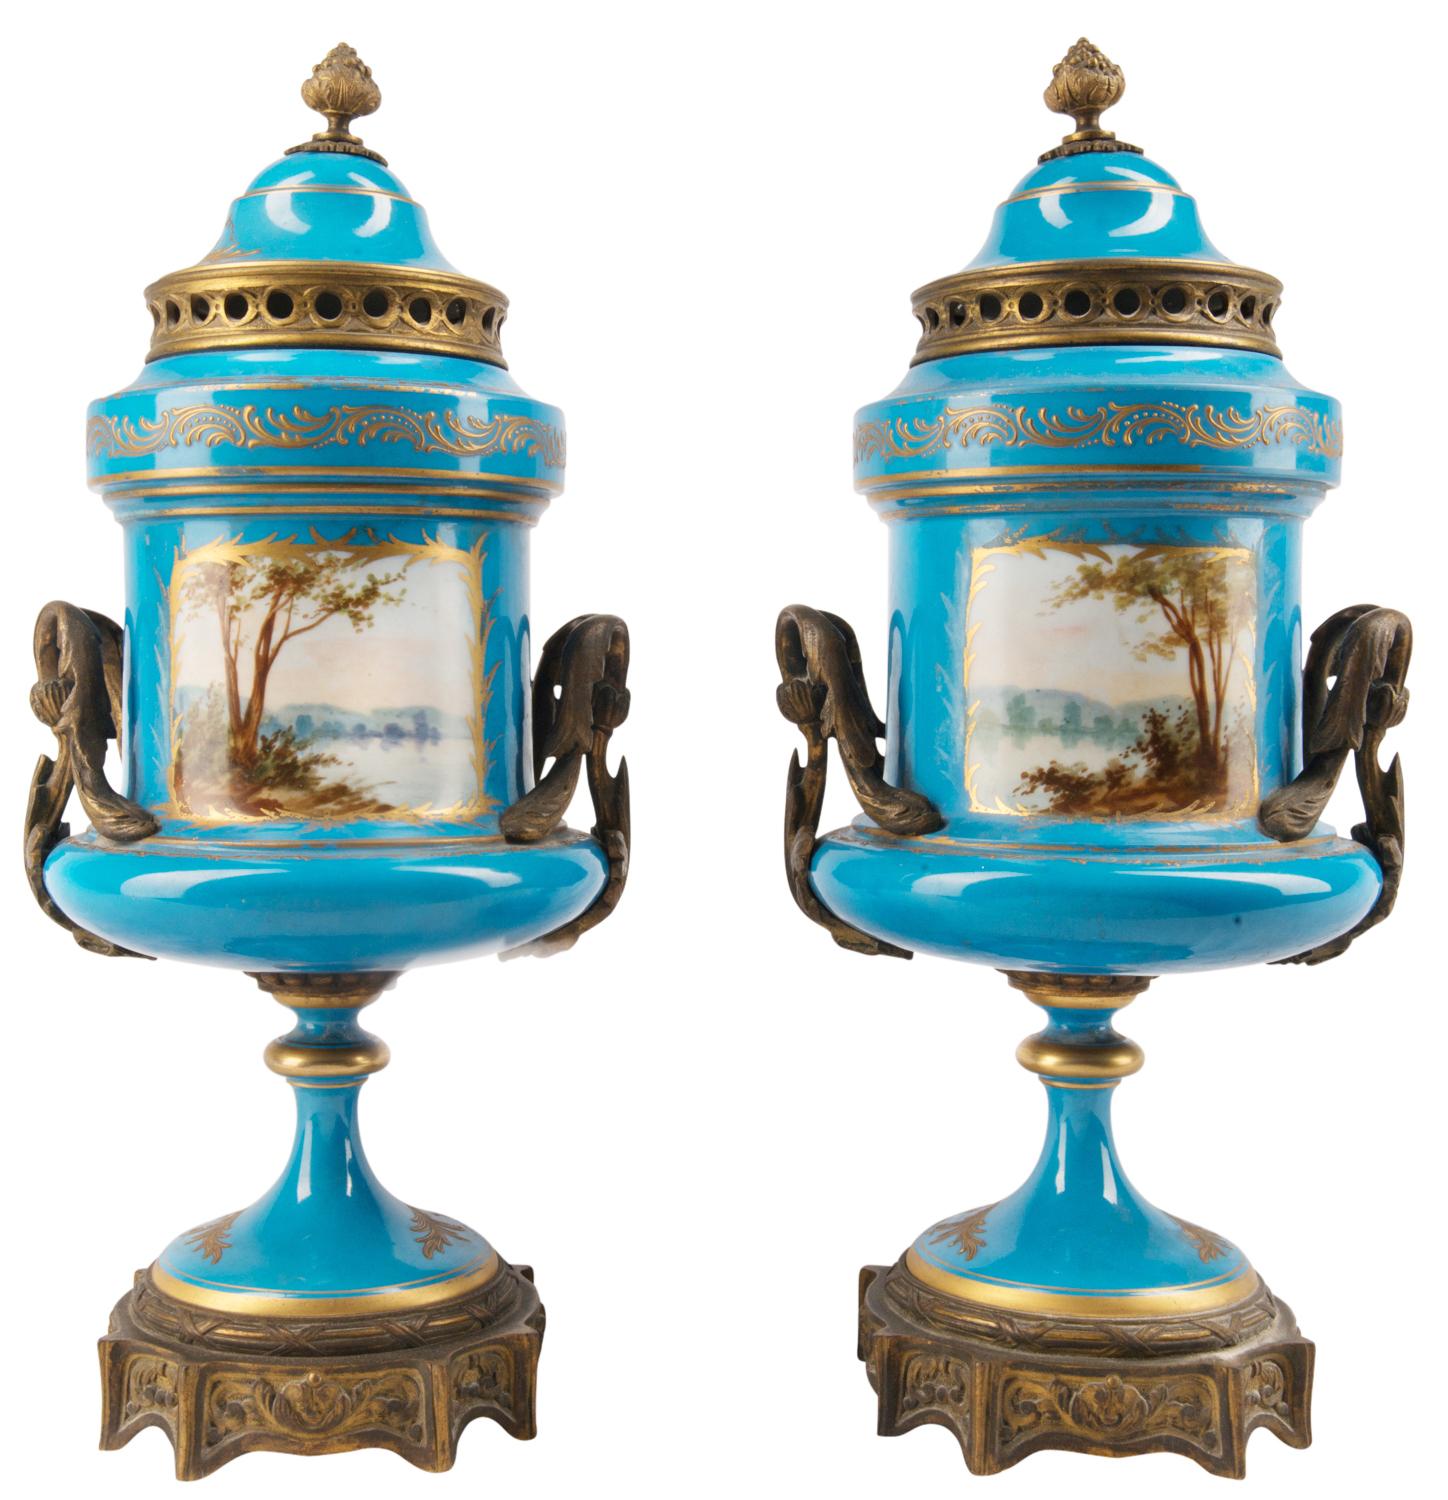 A good quality pair of French late 19th century French 'Sevres' style porcelain lidded urns. Each with gilded ormolu mounts, turquoise ground with gilt decoration. Inset painted panels depicting romantic scenes, raised on pedestal porcelain bases